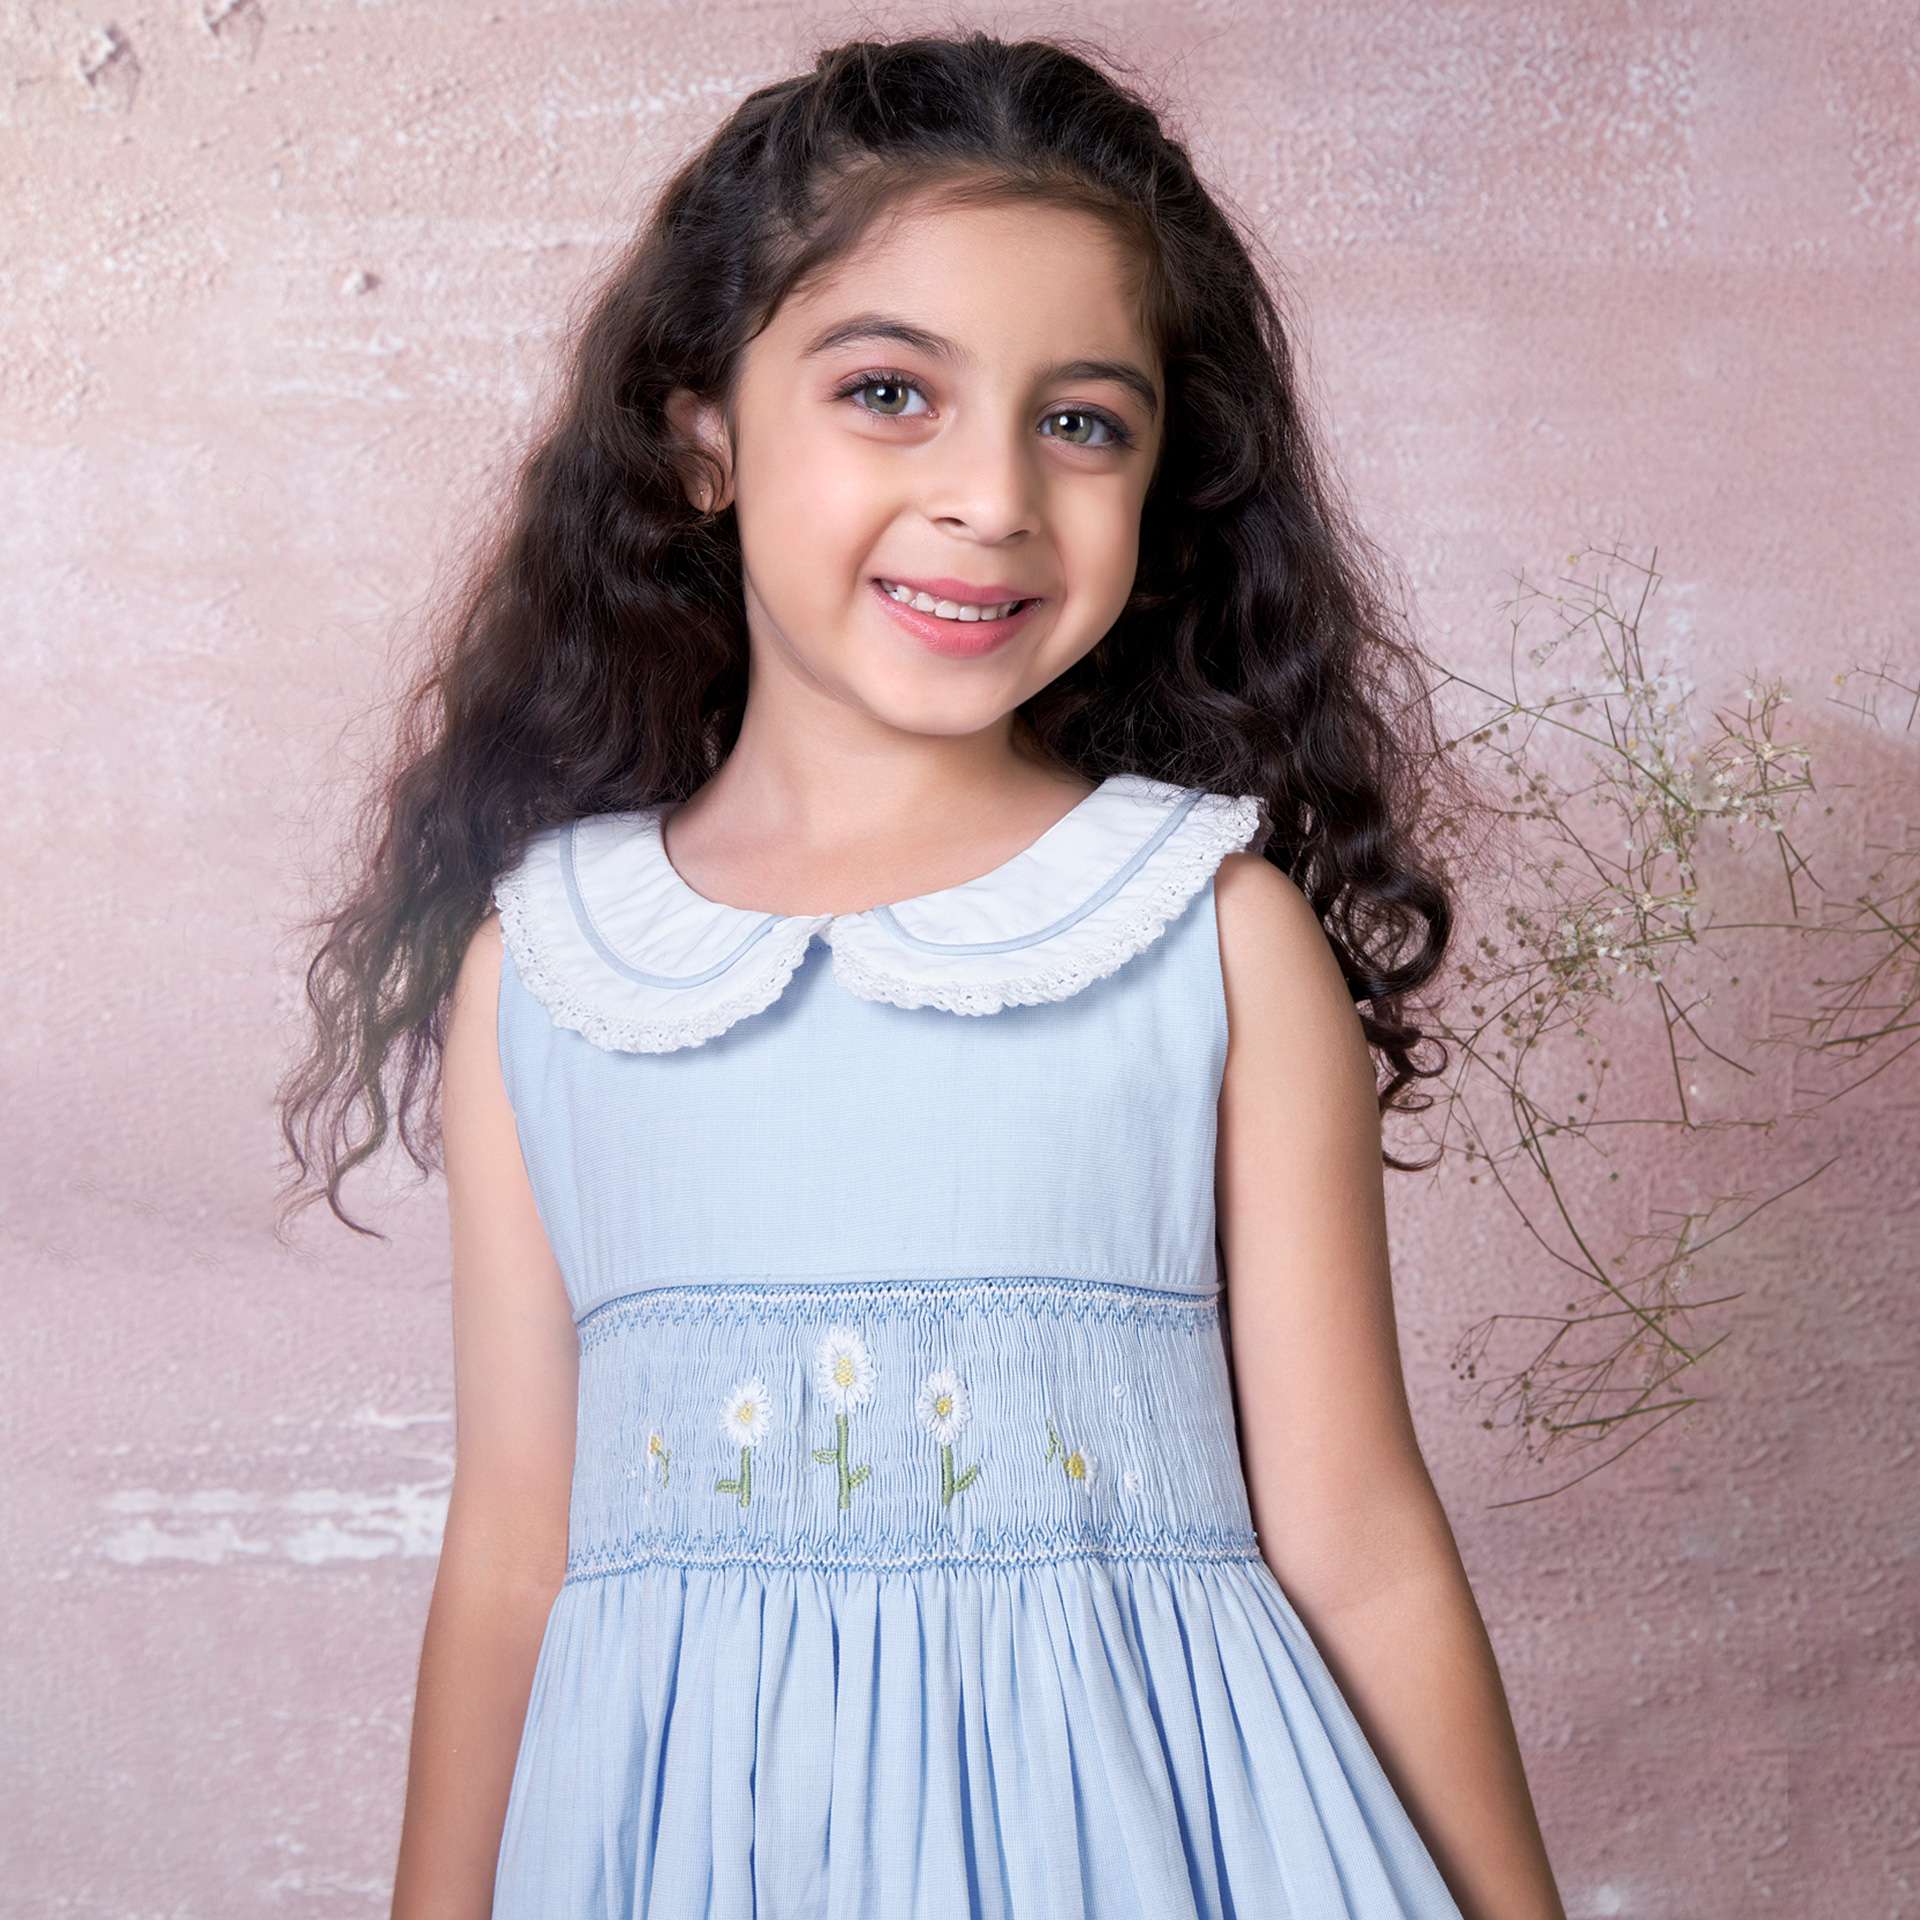 A little girl in blue hand-smocked dress with a lace insert on the skirt and a detailed collar with lace and cord piping